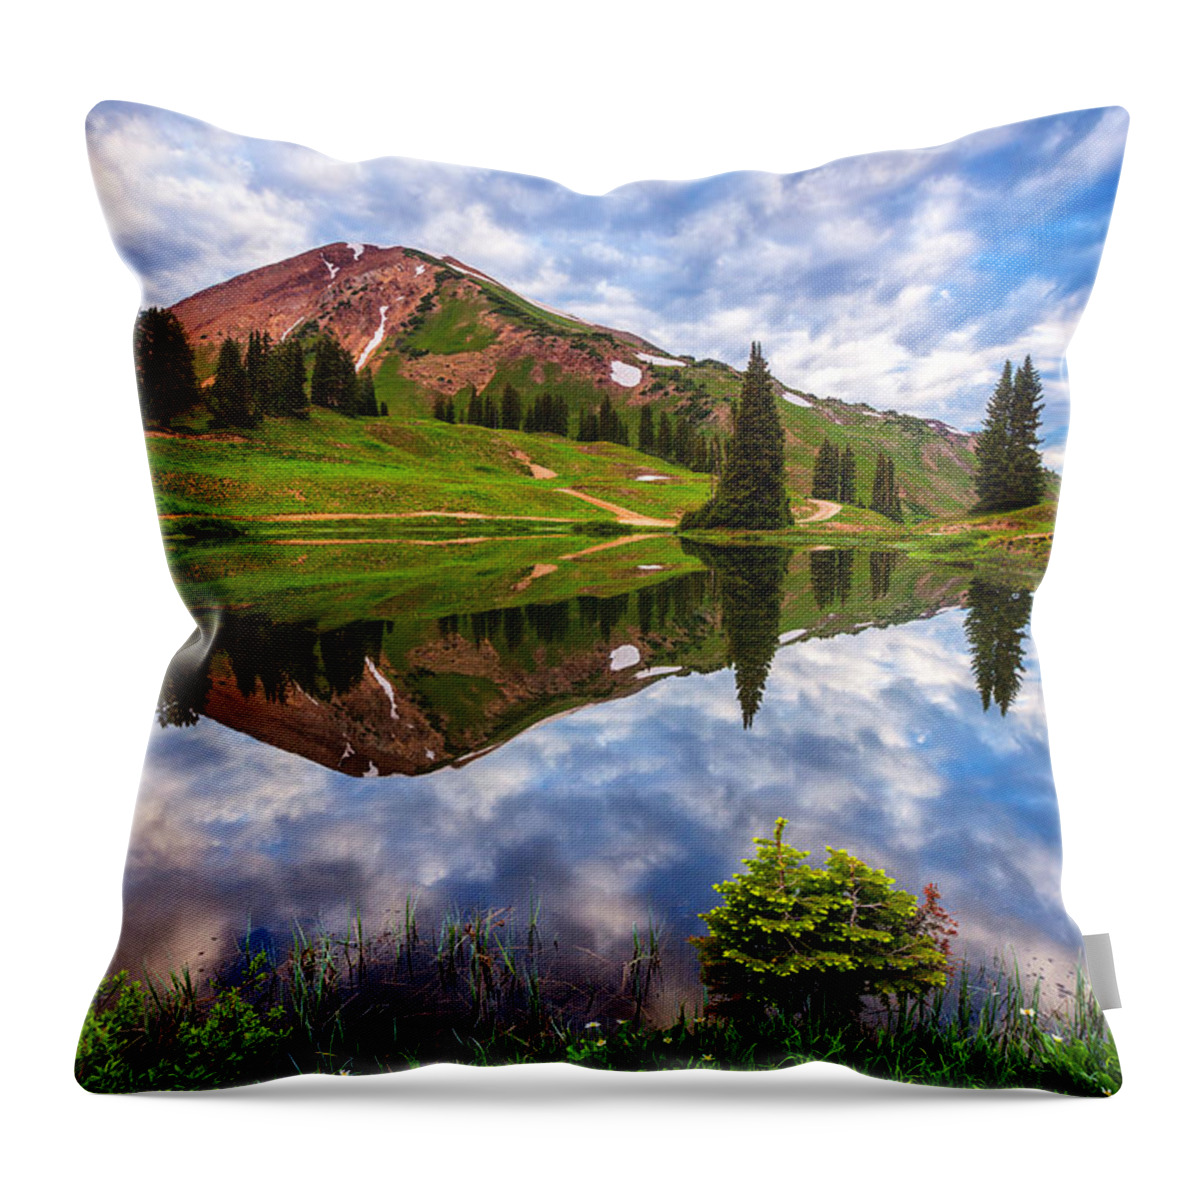 Colorado Throw Pillow featuring the photograph Alpine Morning by Darren White